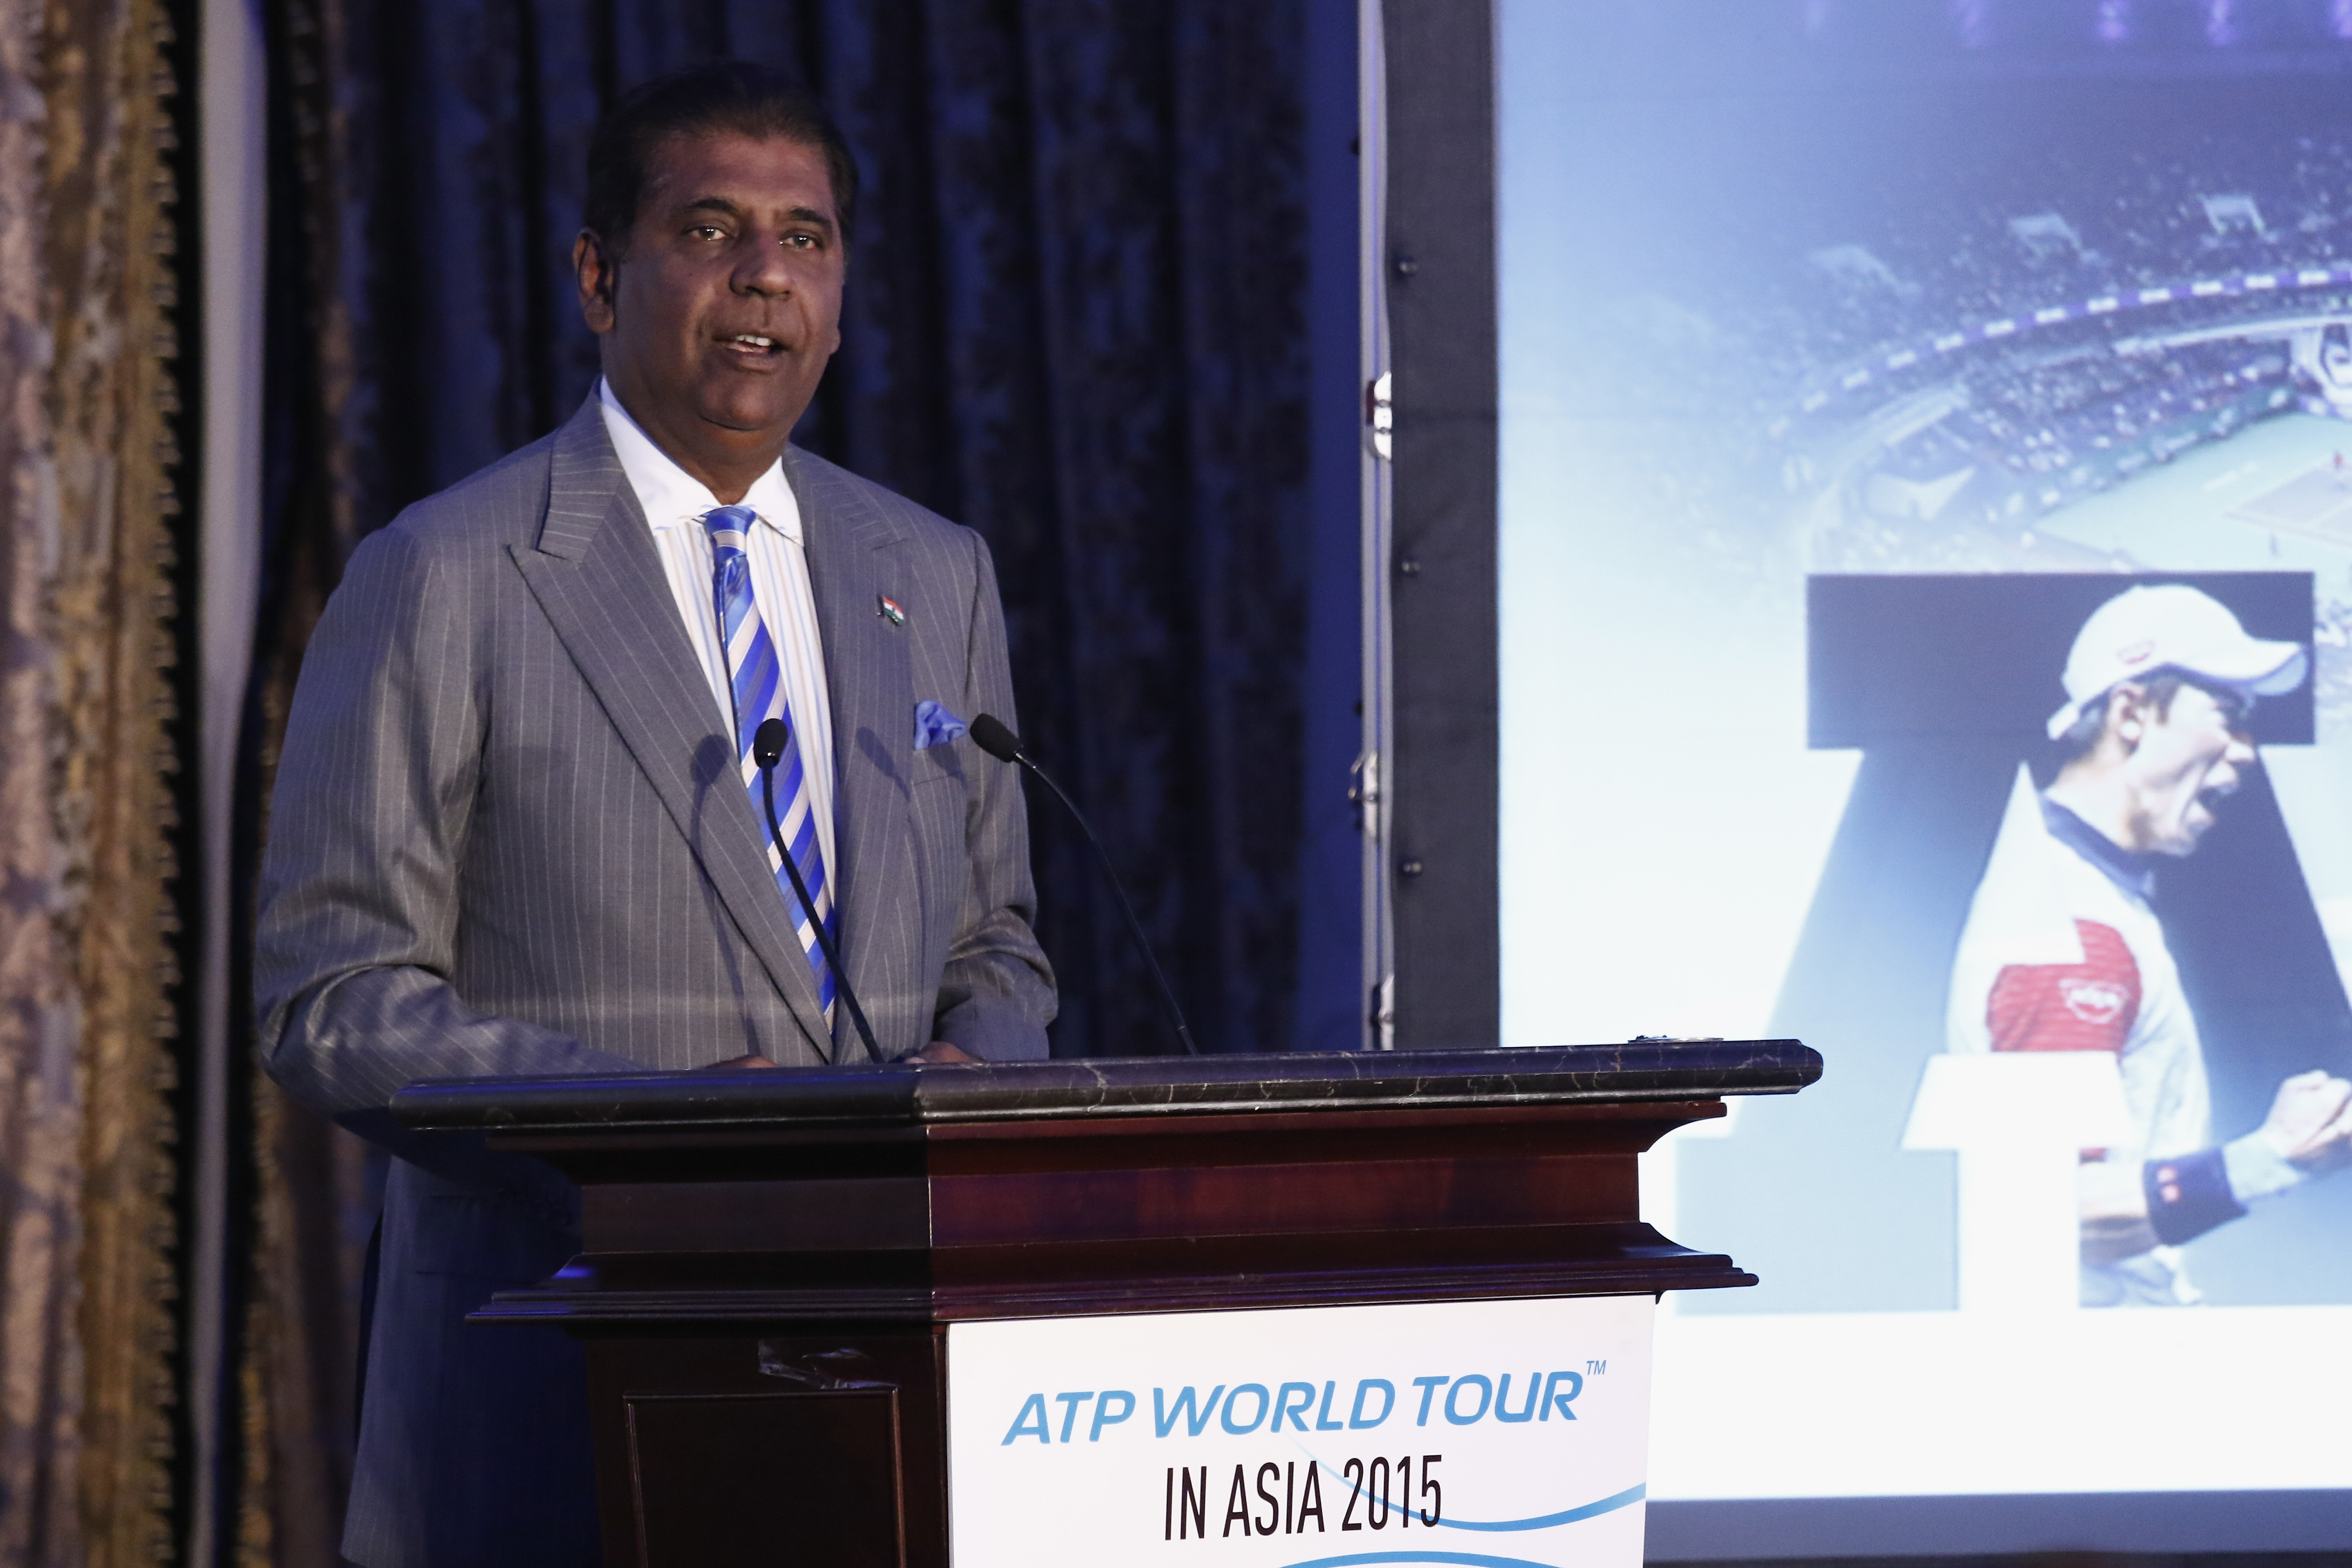 Indian Tennis | The focus has to be on singles for India, says Vijay Amritraj